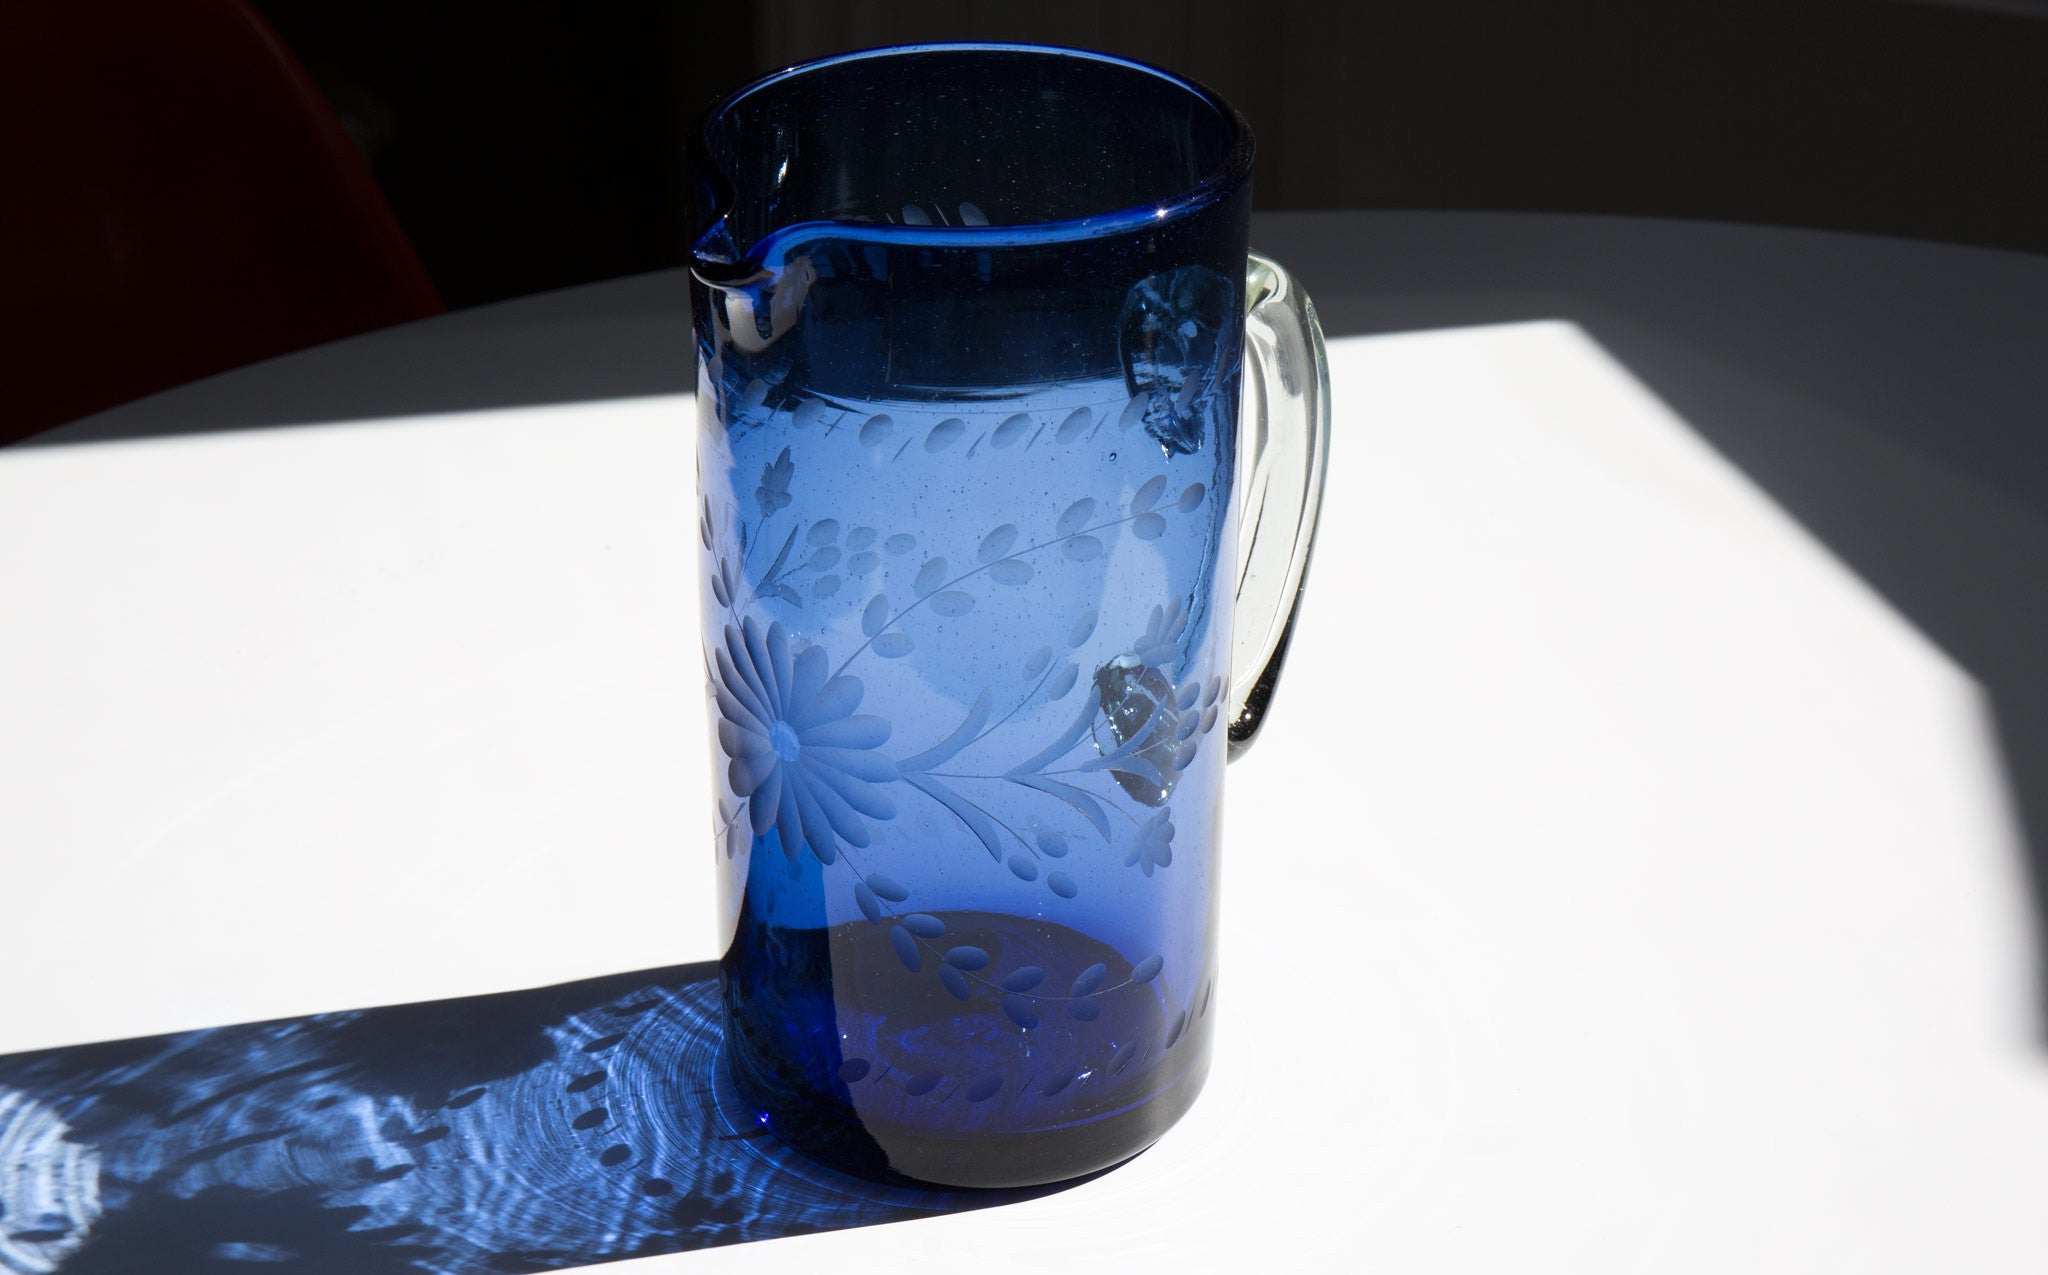 Etched Mexican Pitcher